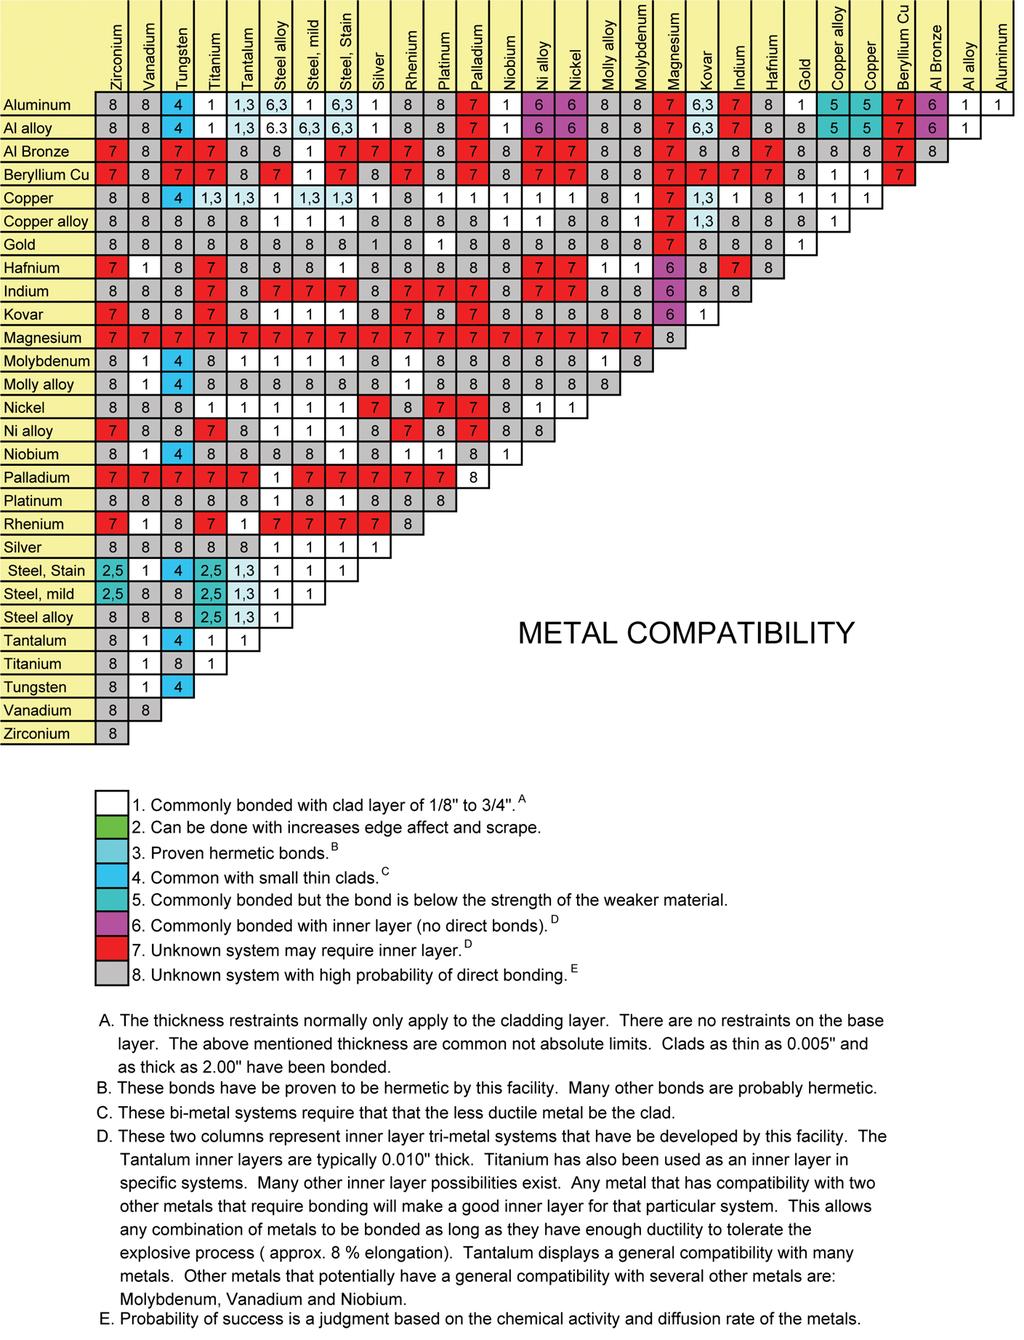 Table 1 Metals Compatibility